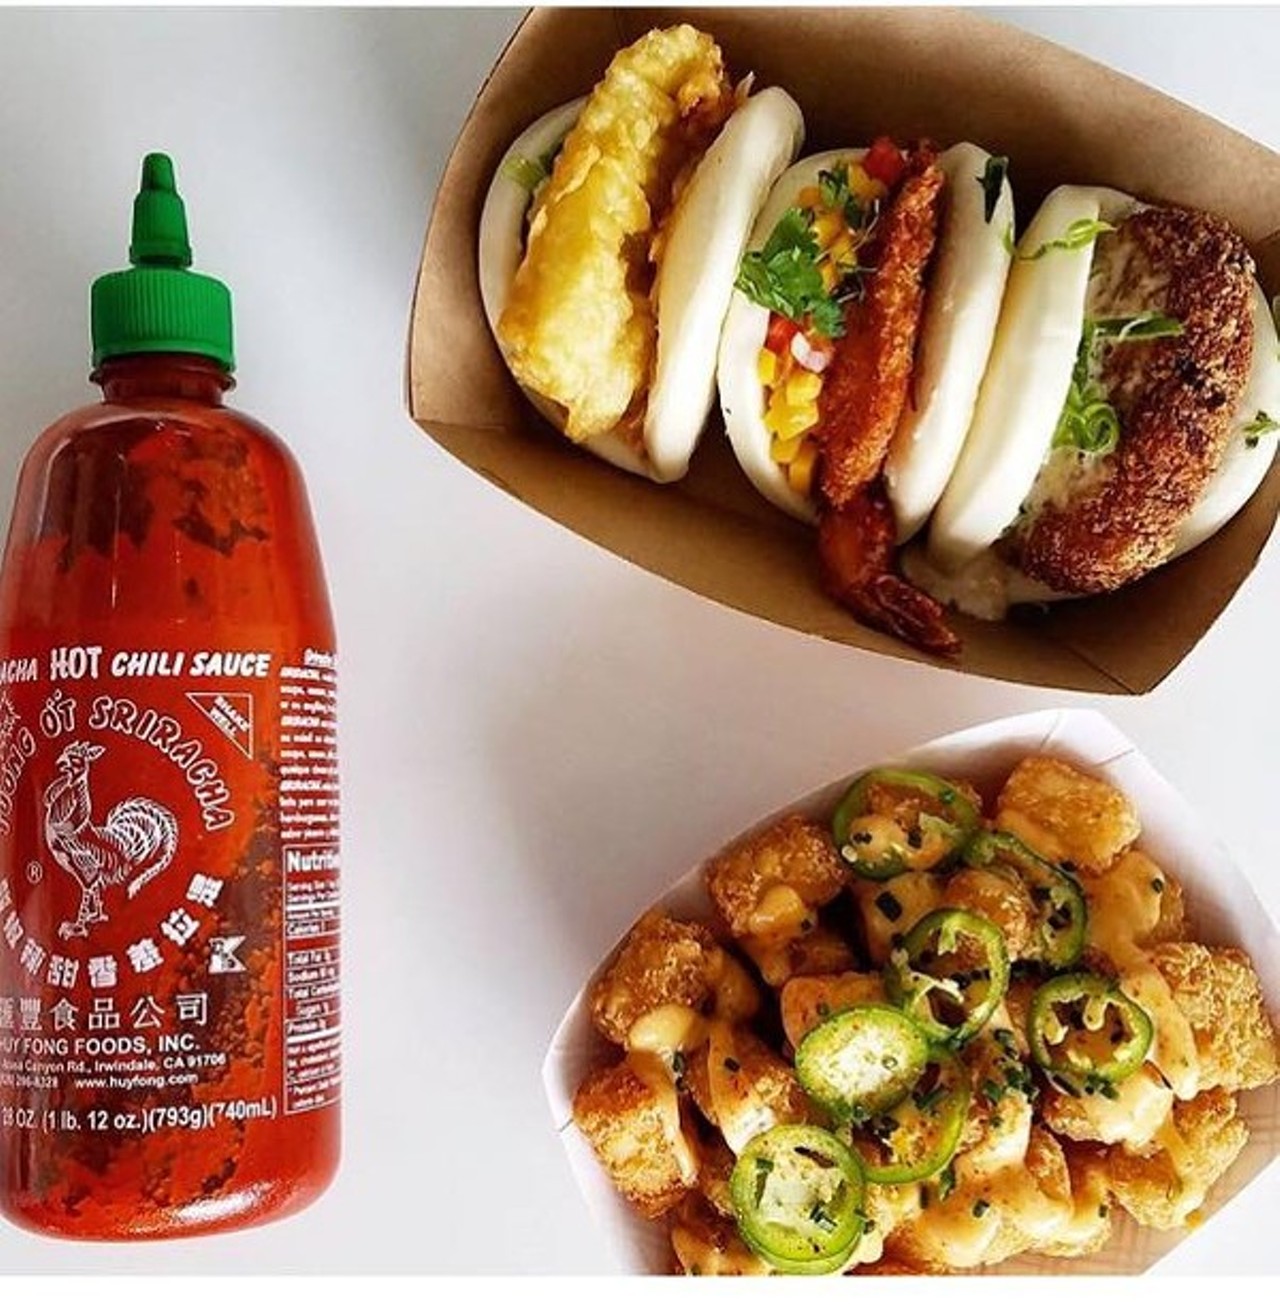 King Bao
710 N Mills Ave, Orlando, (407) 237-0013 
There's probably no better metaphor for Mills 50 than the Mr. Potato Head: a sweet-potato croquette topped with sour cream and roasted corn salsa, wrapped up in a soft, fluffy bao bun for $3.
Photo via Photo via King Bao/Facebook